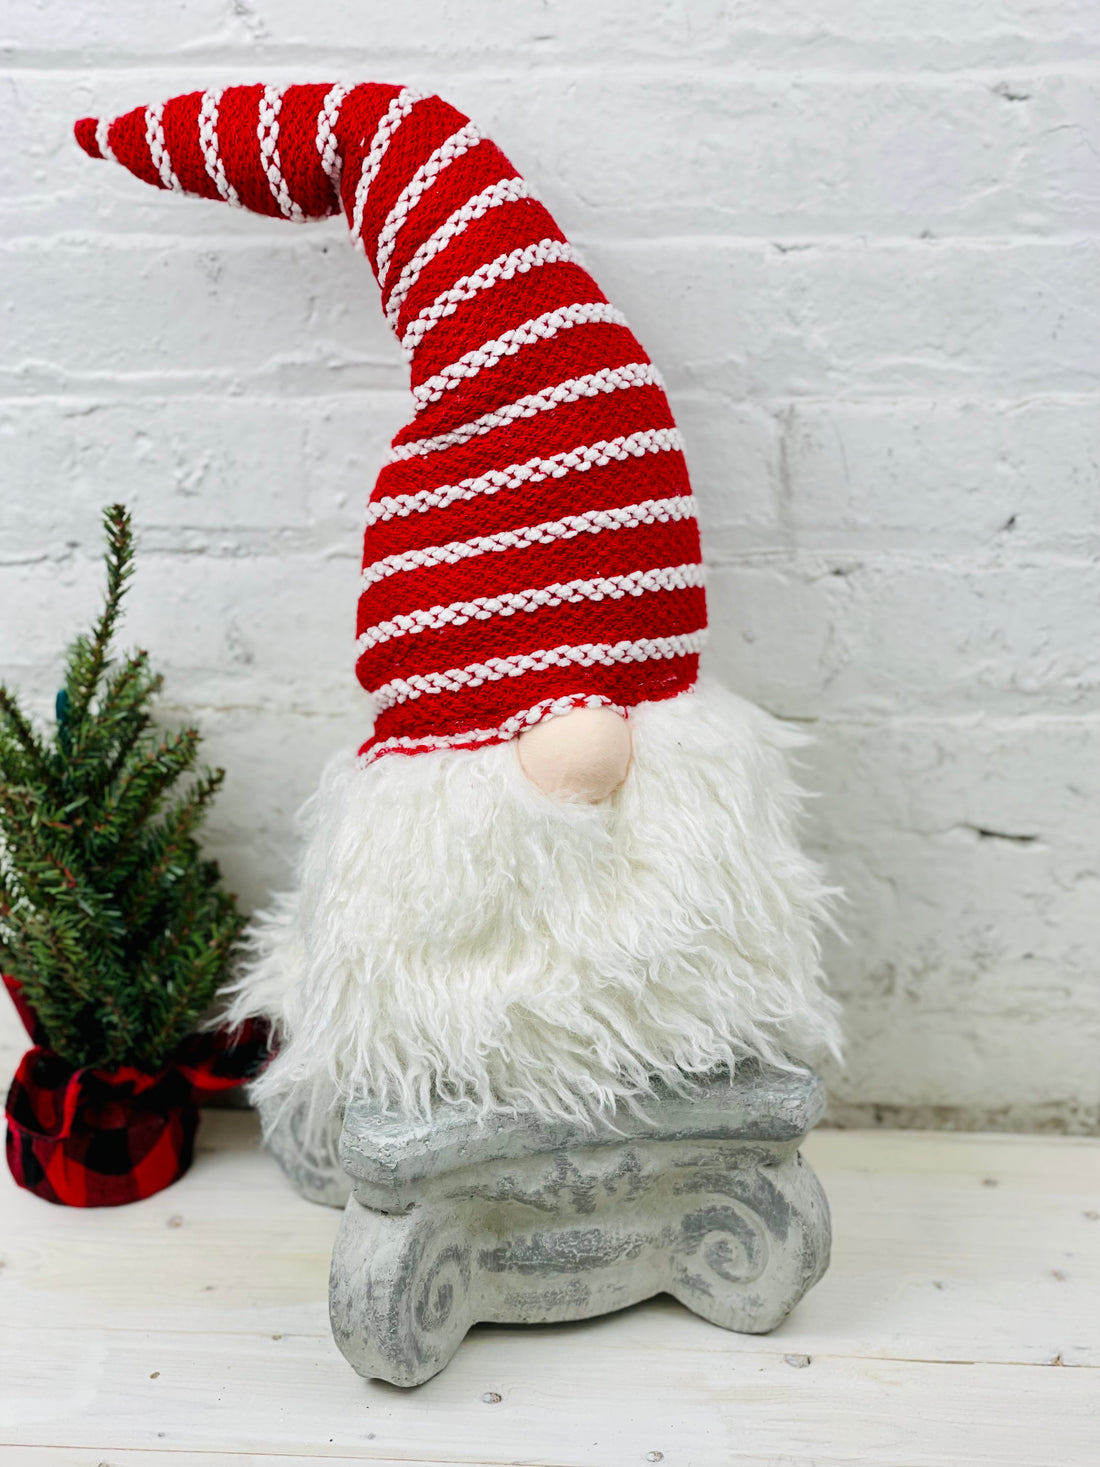 Large Red and White Striped Hat Gnome with Light Up Nose